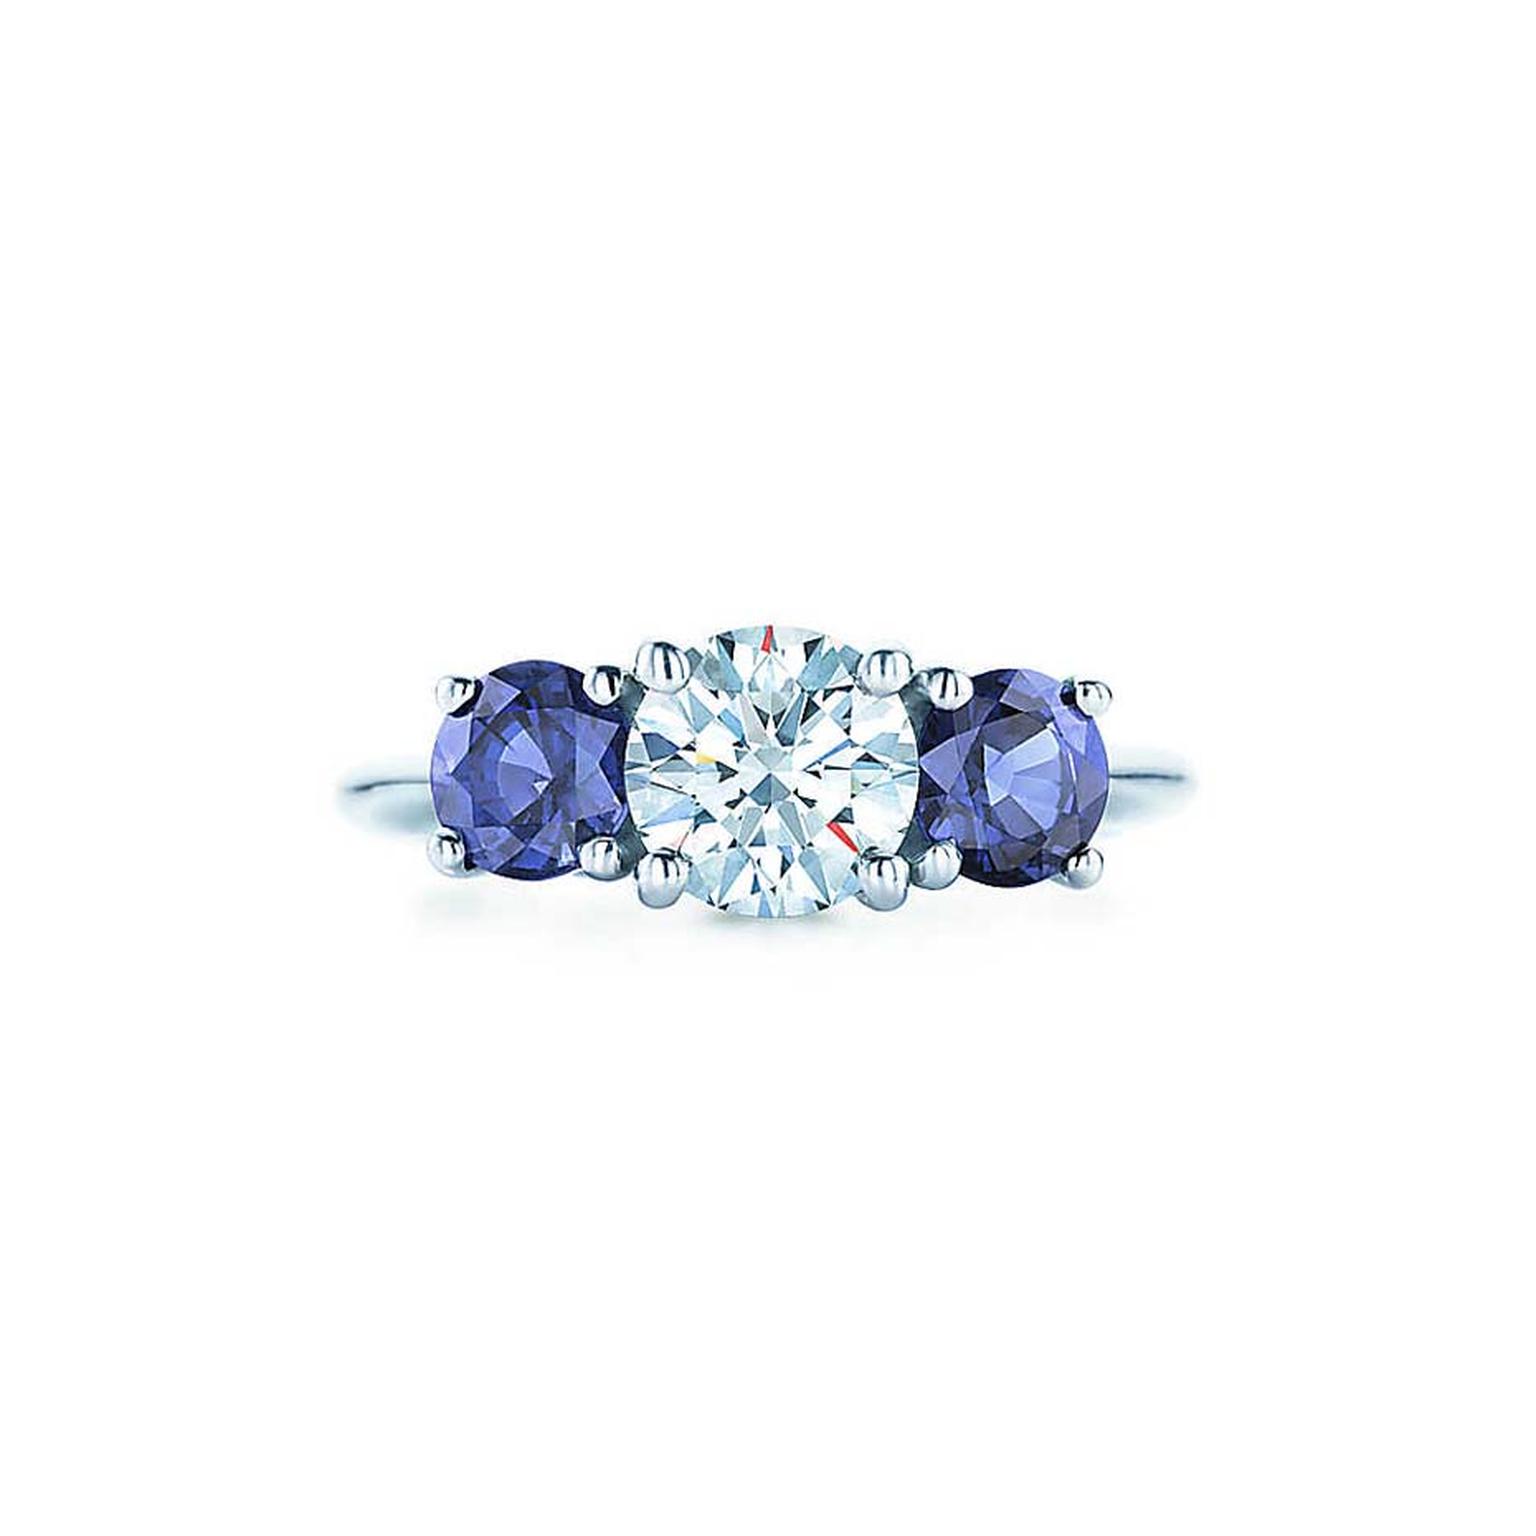 Tiffany & Co. ring featuring a central brilliant-cut diamond flanked by a sapphire on either side.